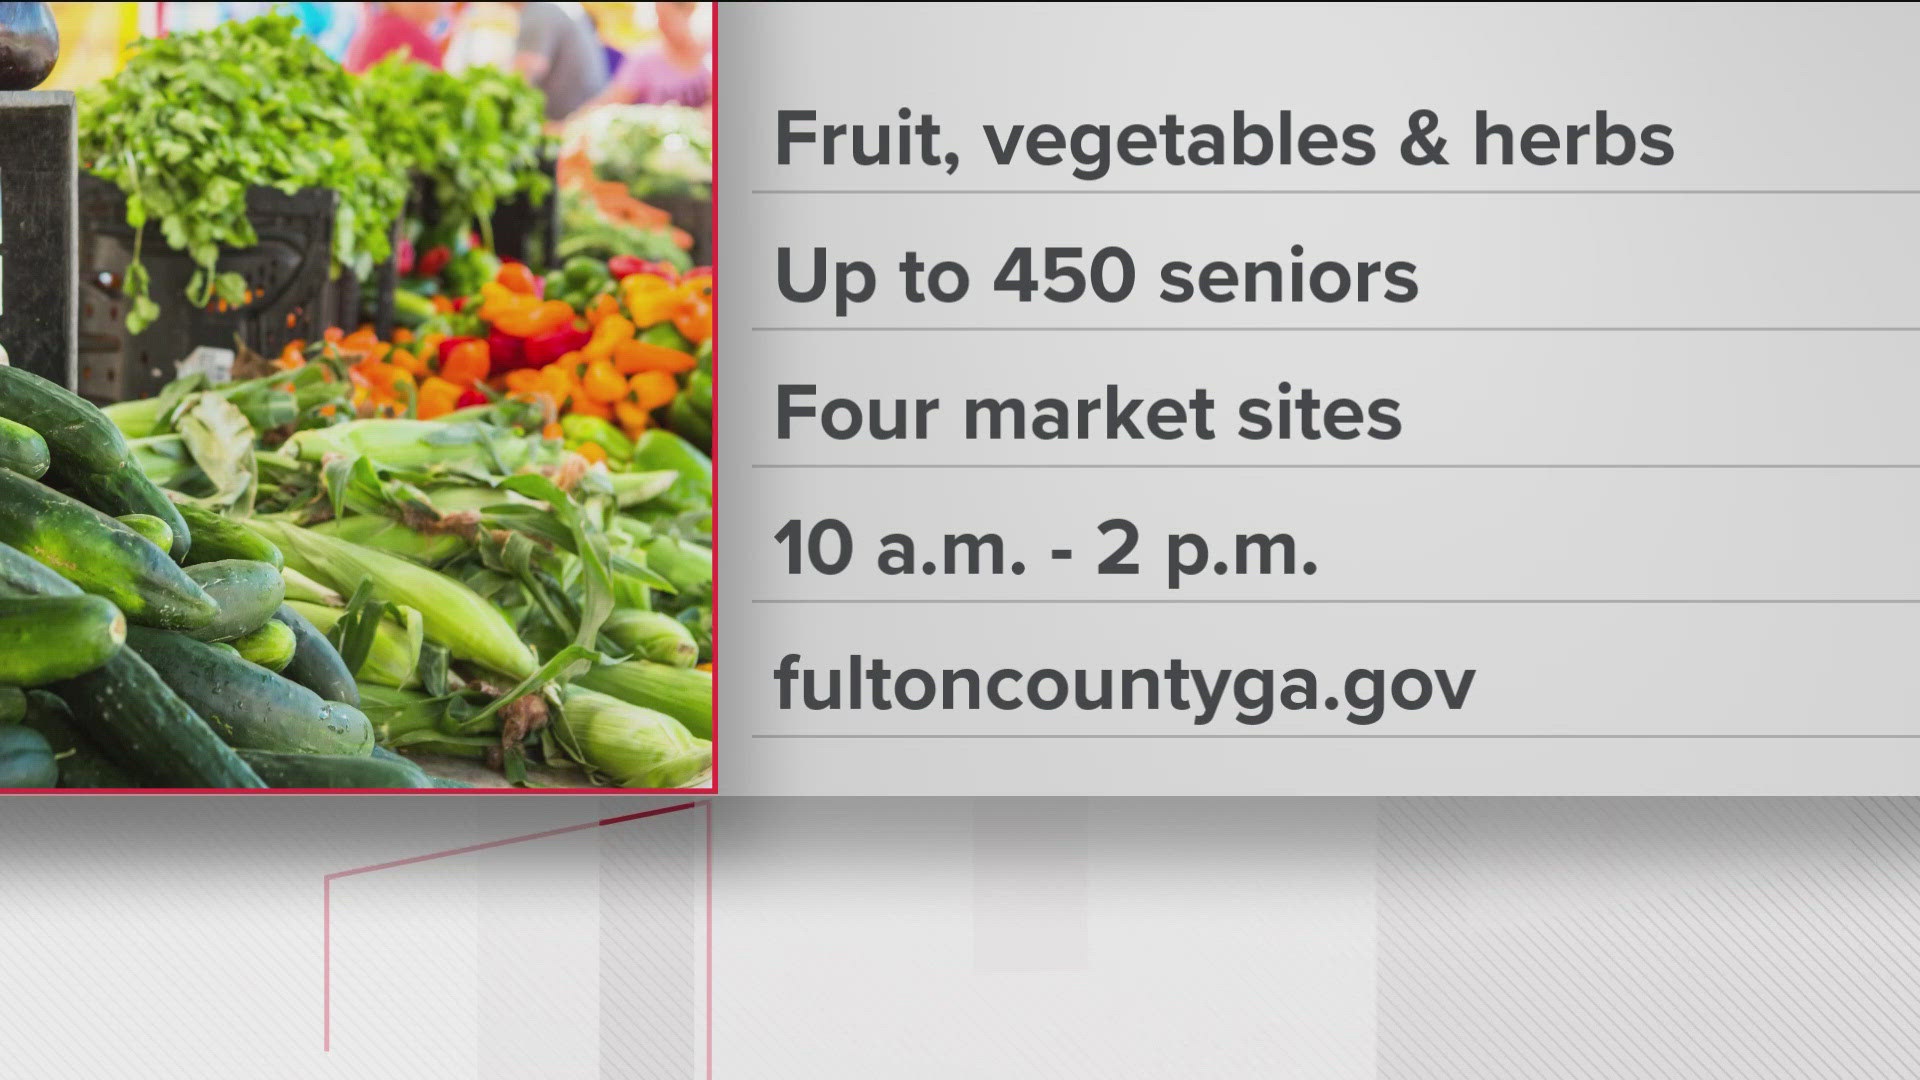 Fulton County is working to make fresh produce more accessible to senior citizens by giving them checks to use at local farmers markets.